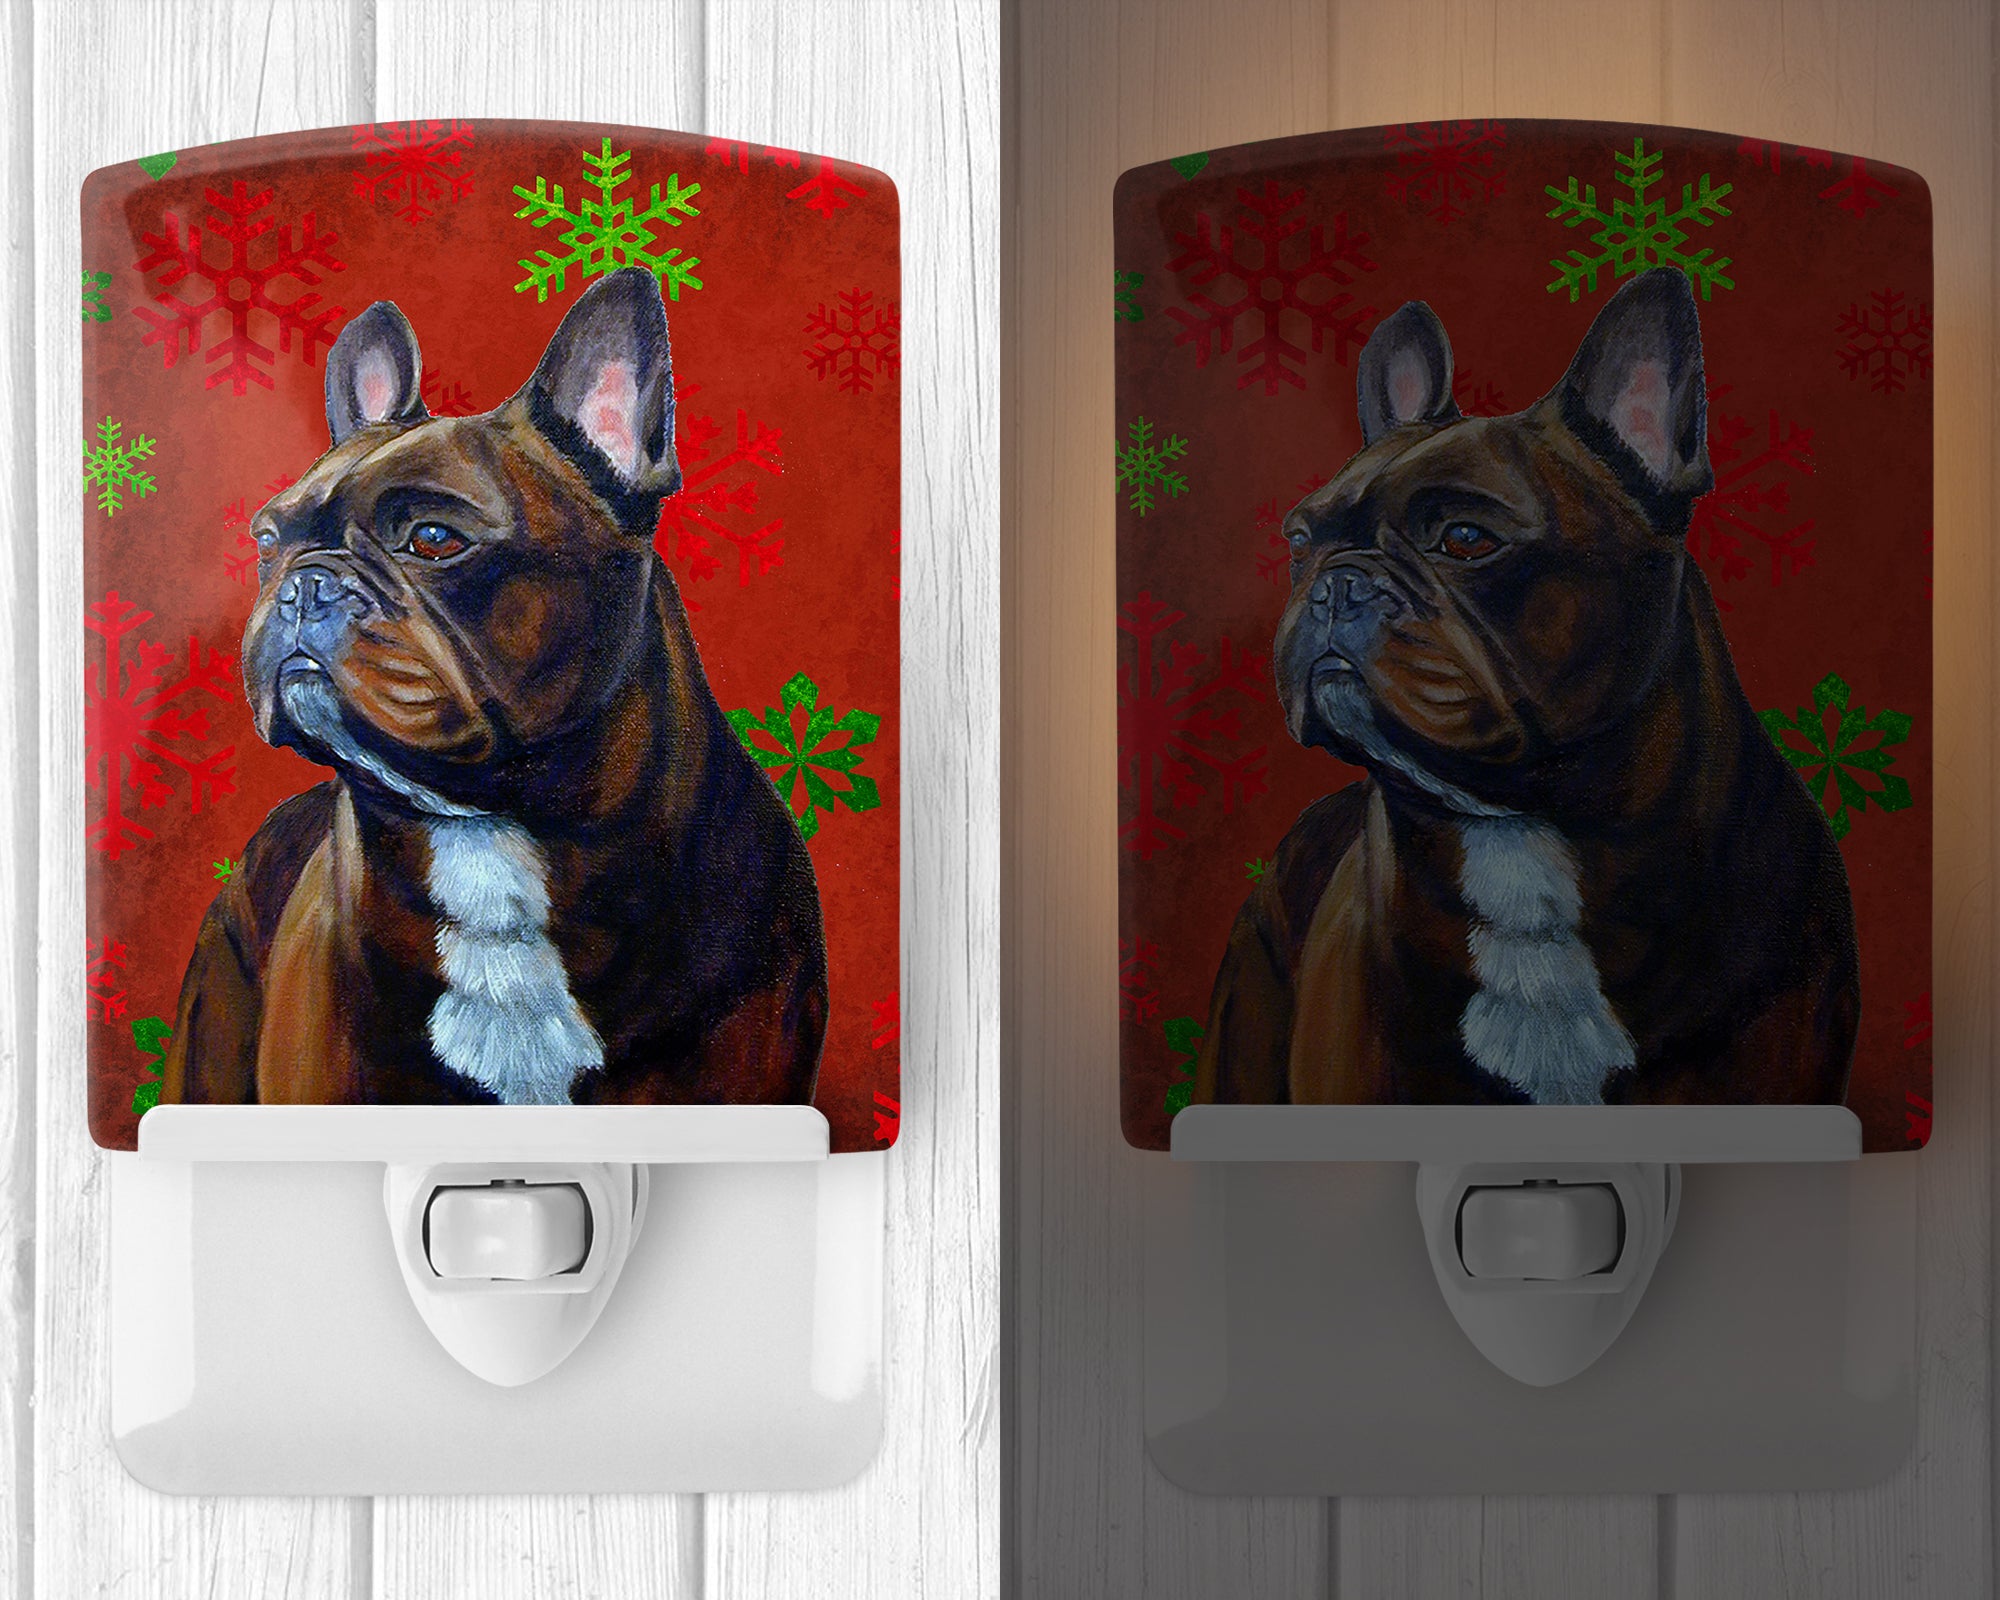 French Bulldog Red and Green Snowflakes Holiday Christmas Ceramic Night Light LH9340CNL - the-store.com